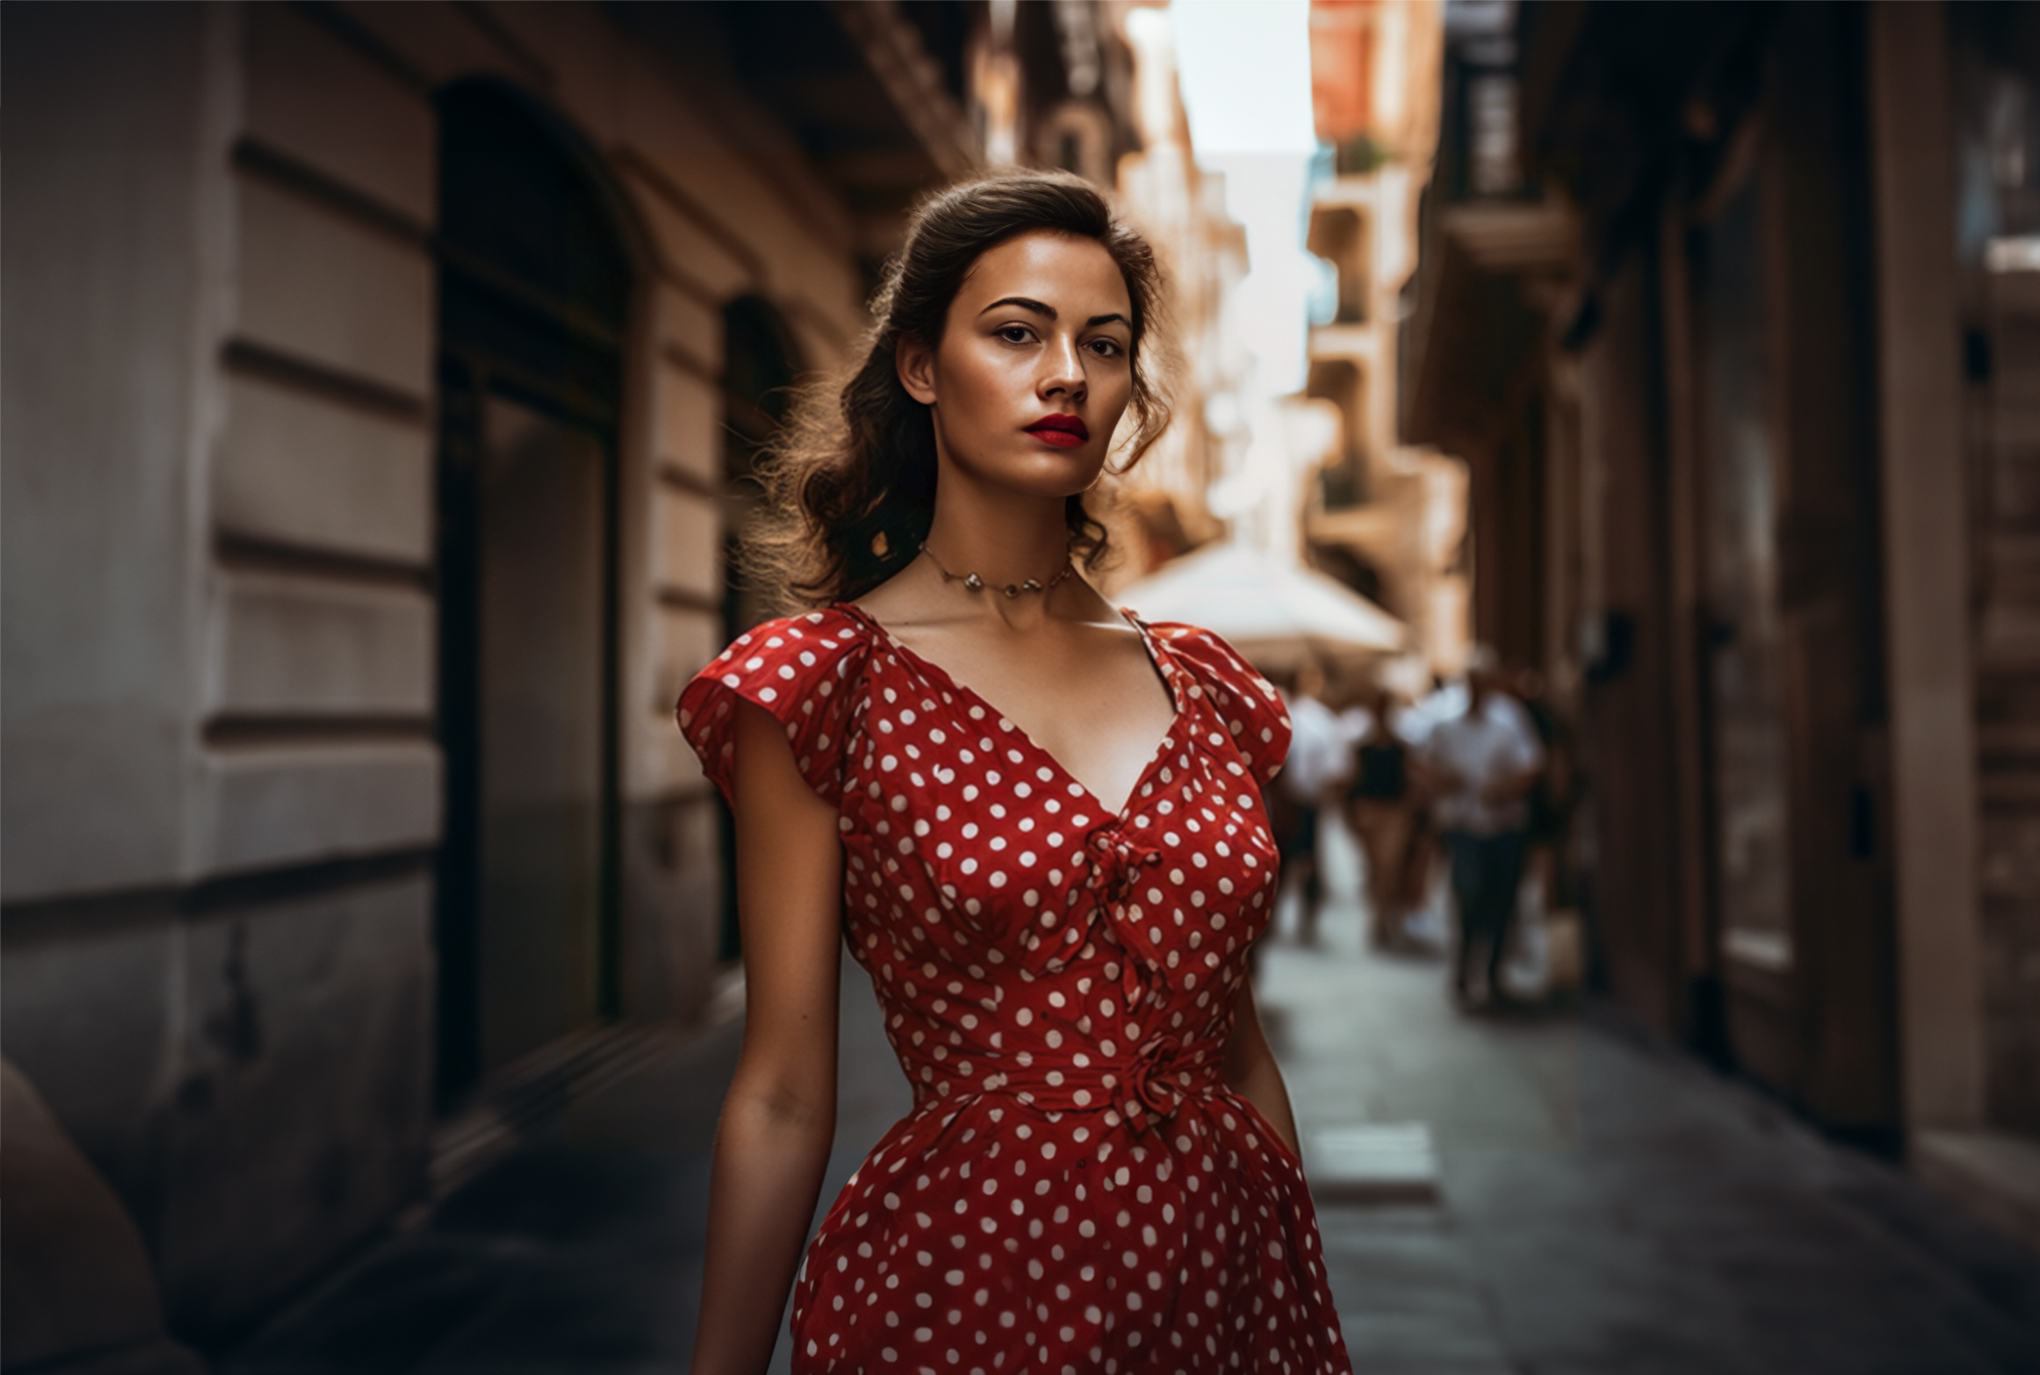 Beautiful Women On new york Street In red Dress Watermark And Royalty Fre Image Download For Free